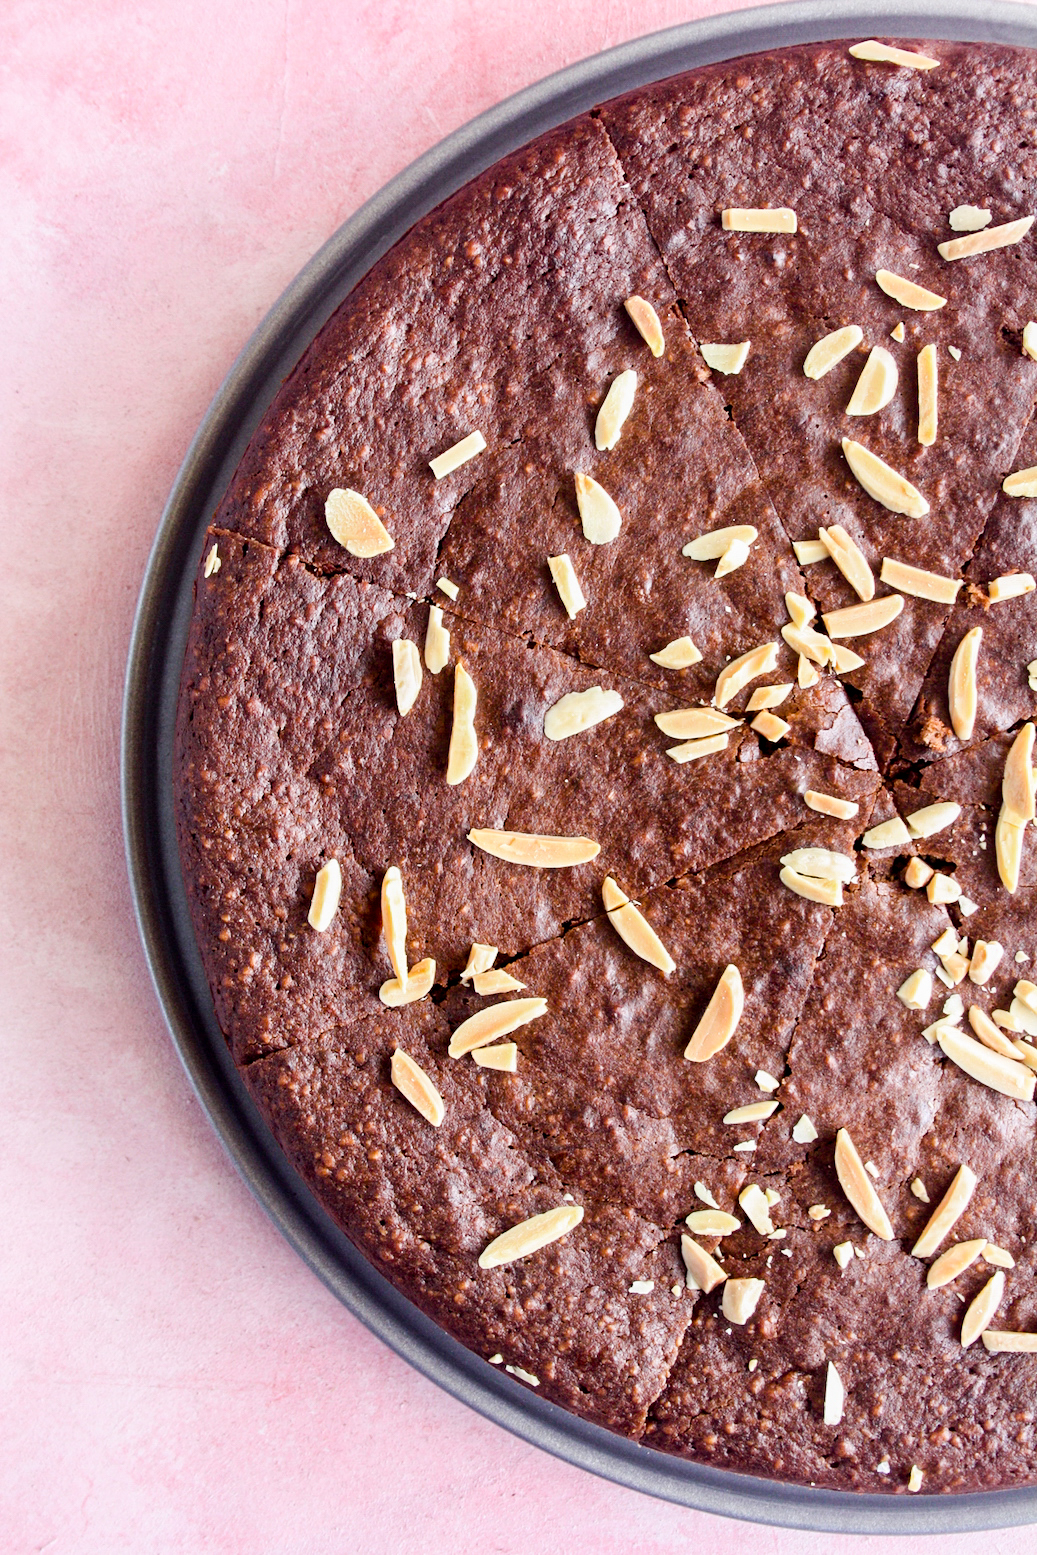 Naturally sweetened fudgy chocolate cake with almonds and bananas